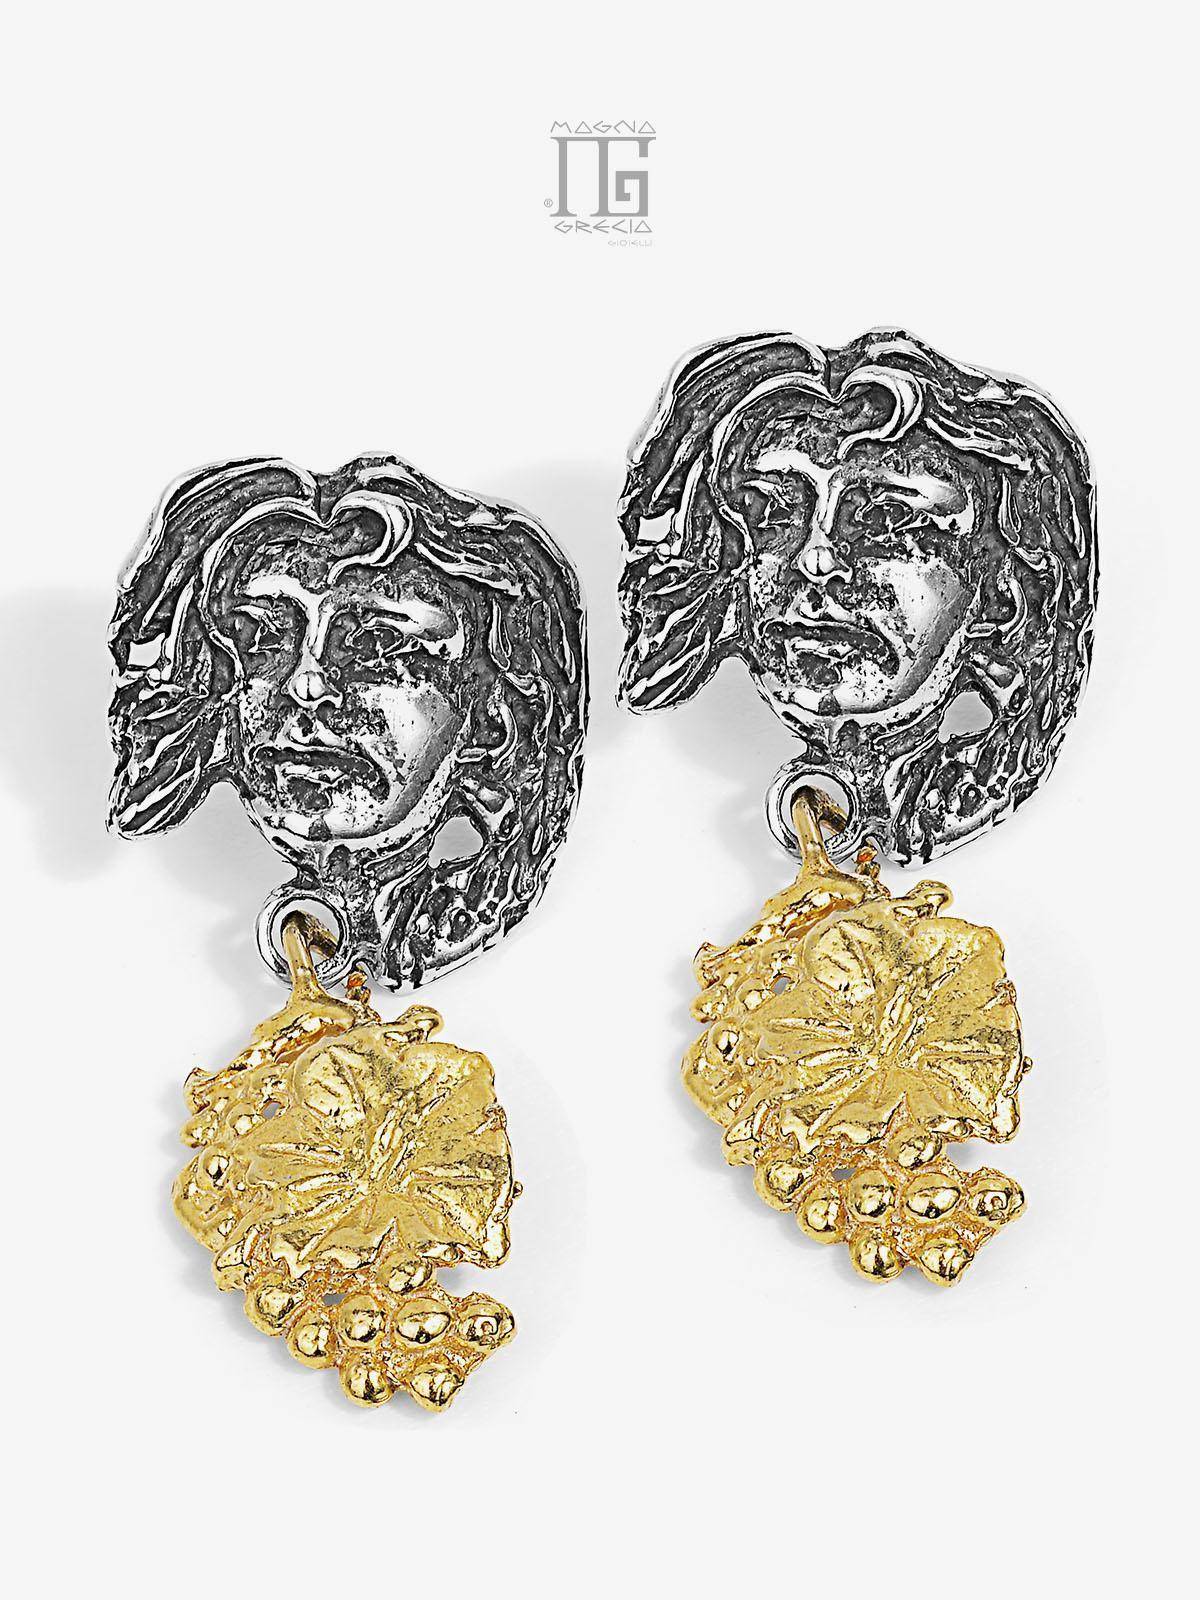 “Autumn” pendant earrings in silver depicting the face of the goddess Venus and bunch of grapes Cod. MGK 3718 V-3